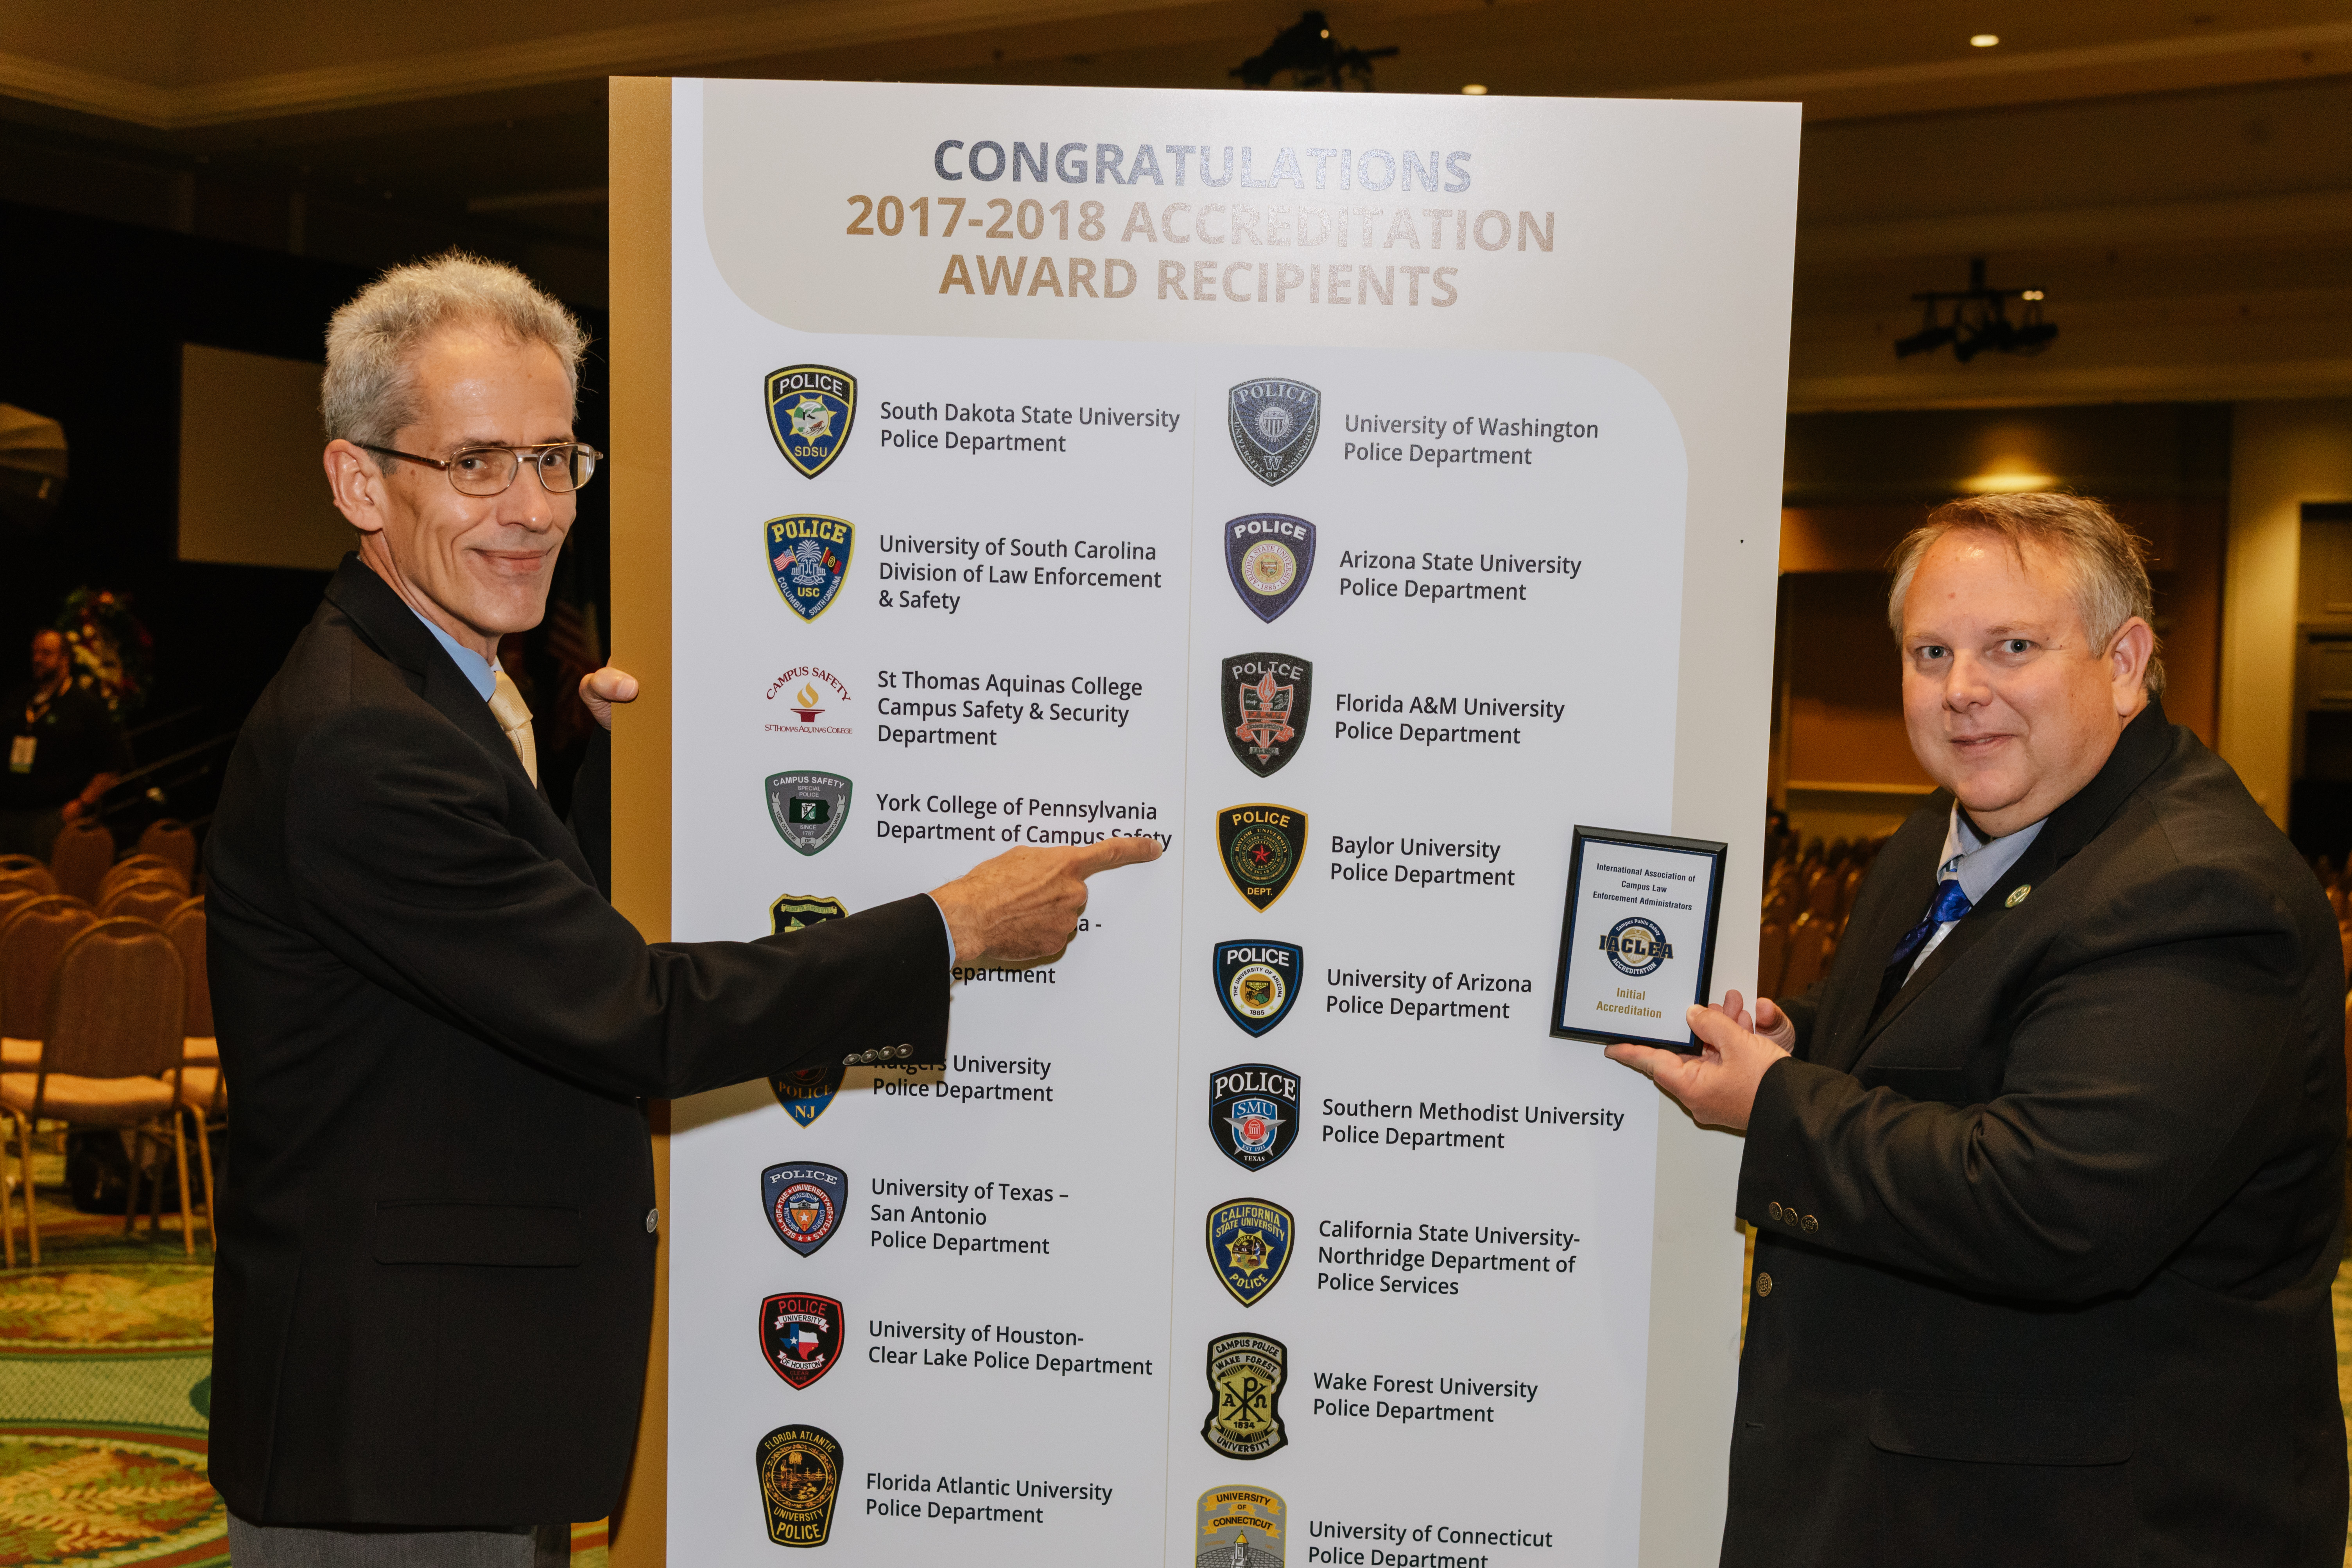 Baylor University Chief of Police Brad Wigtil and Accreditation Manager Sgt. Andrew Huntington point out their achievement following the Awards Ceremony at the 2018 Annual Conference & Exposition. © Mike Ritter